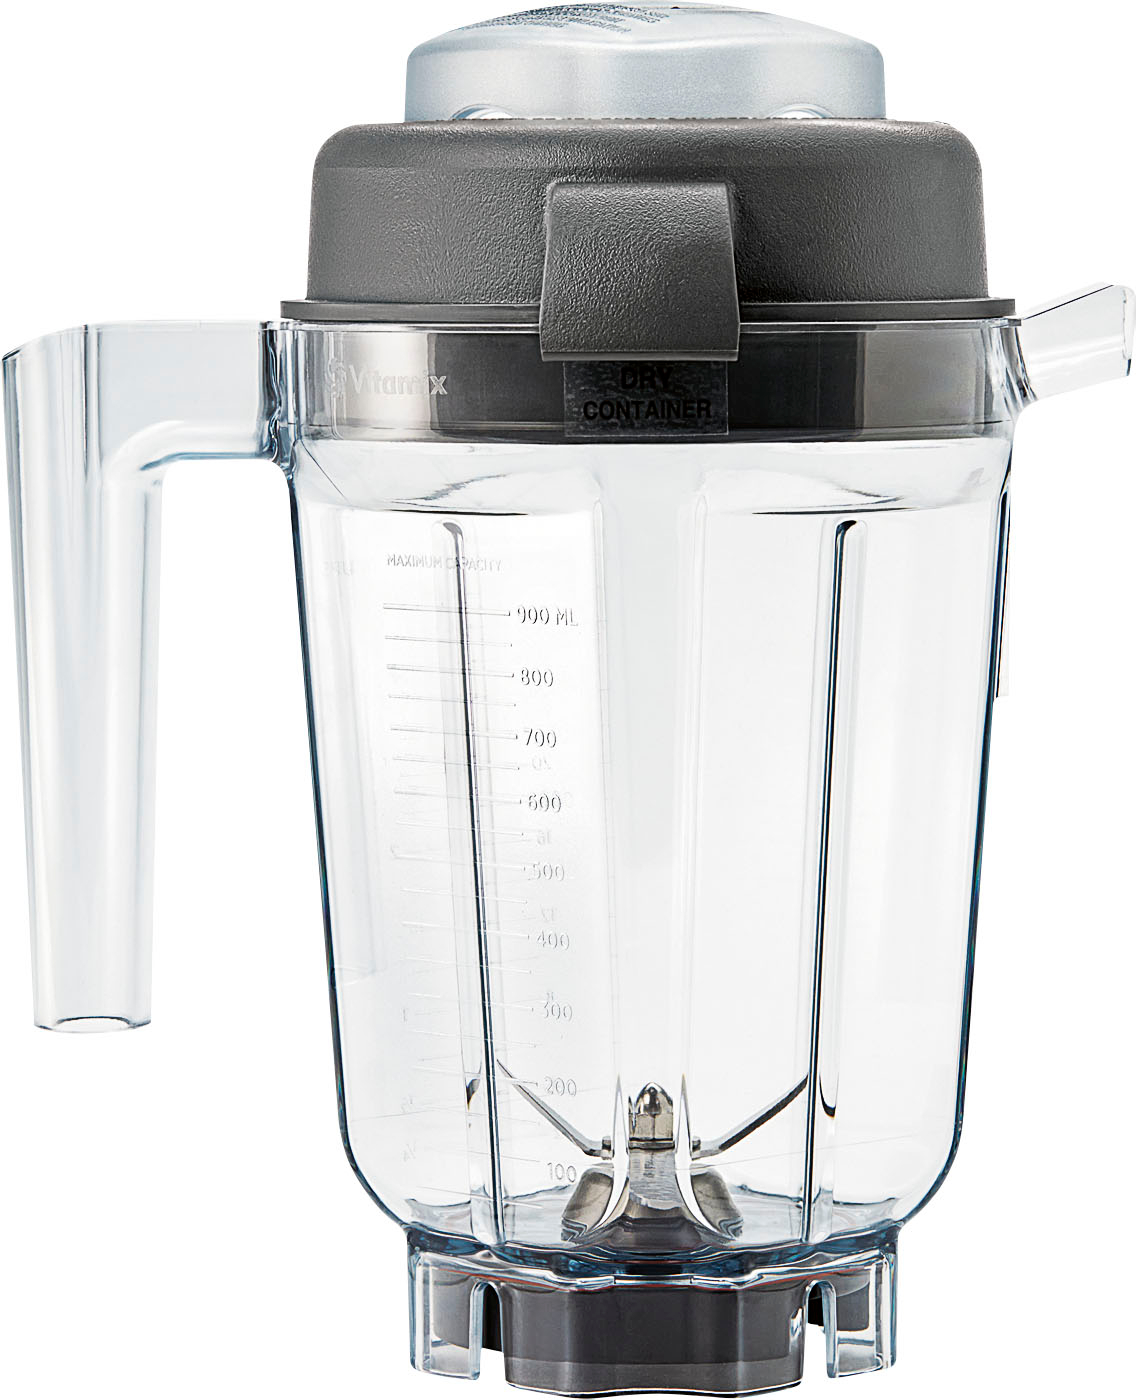 Angle View: Vitamix - Legacy 32oz Dry Container - none